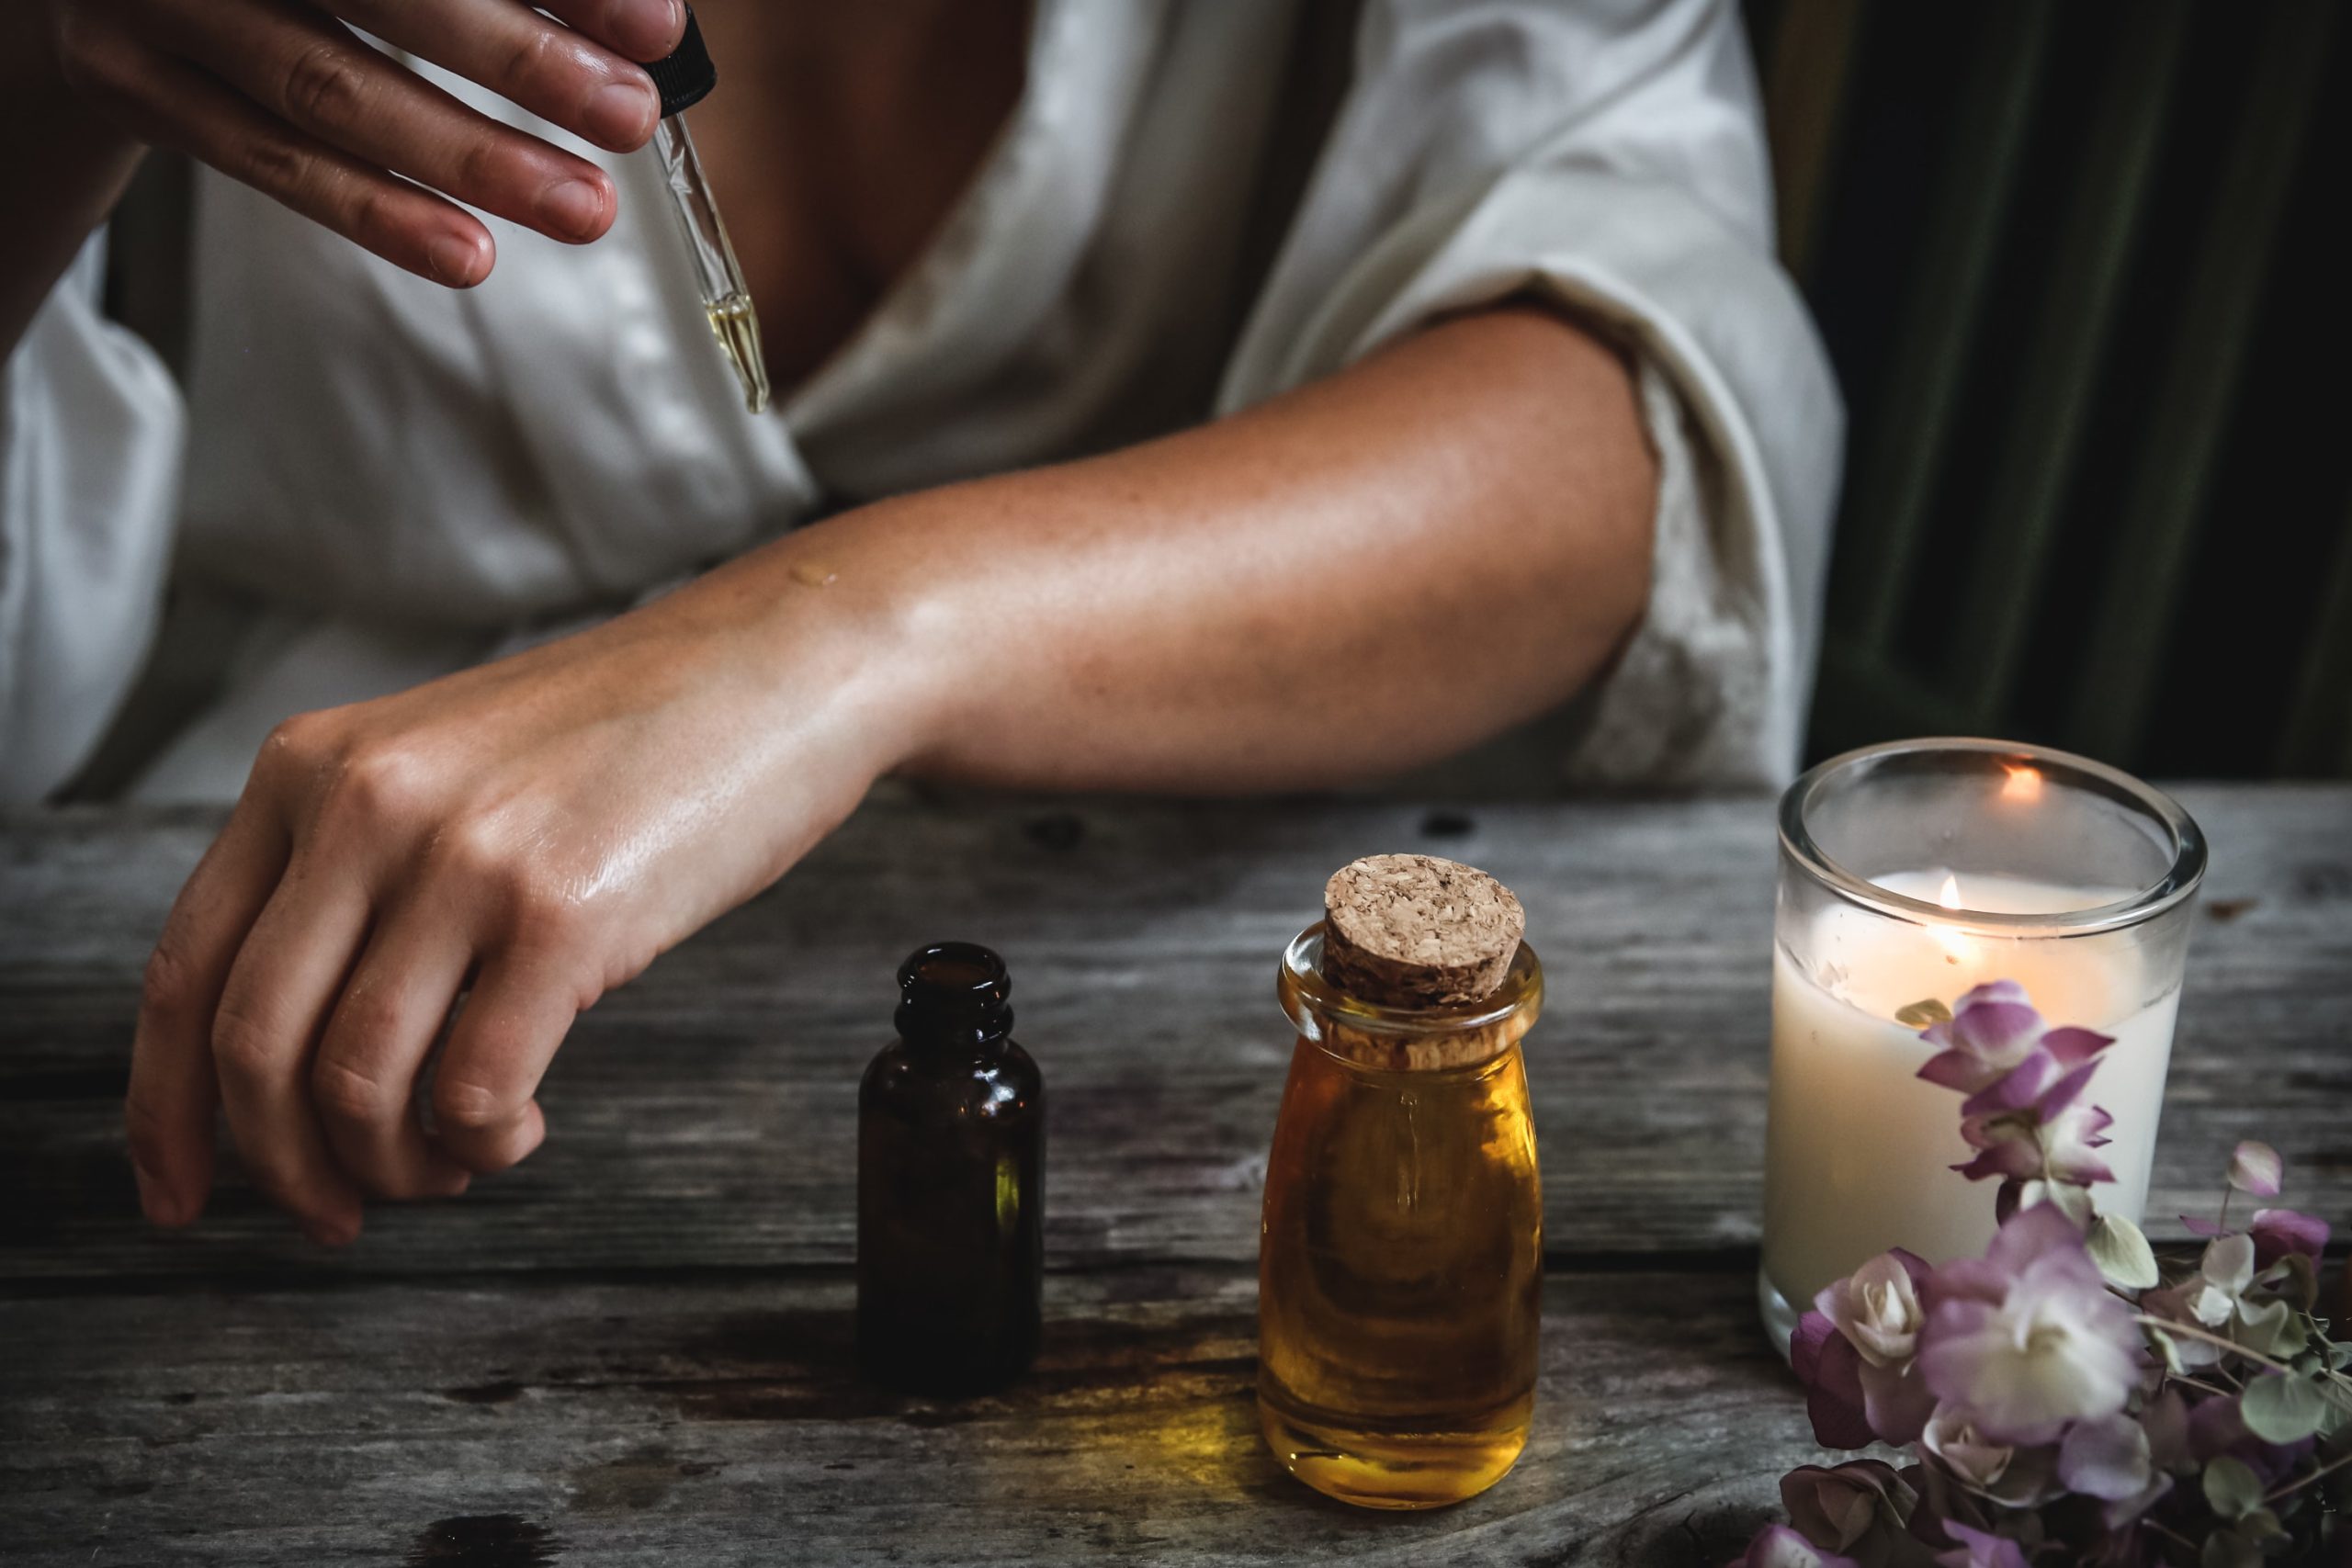 HEMP OIL VS CBD OIL: IS THERE A DIFFERENCE?